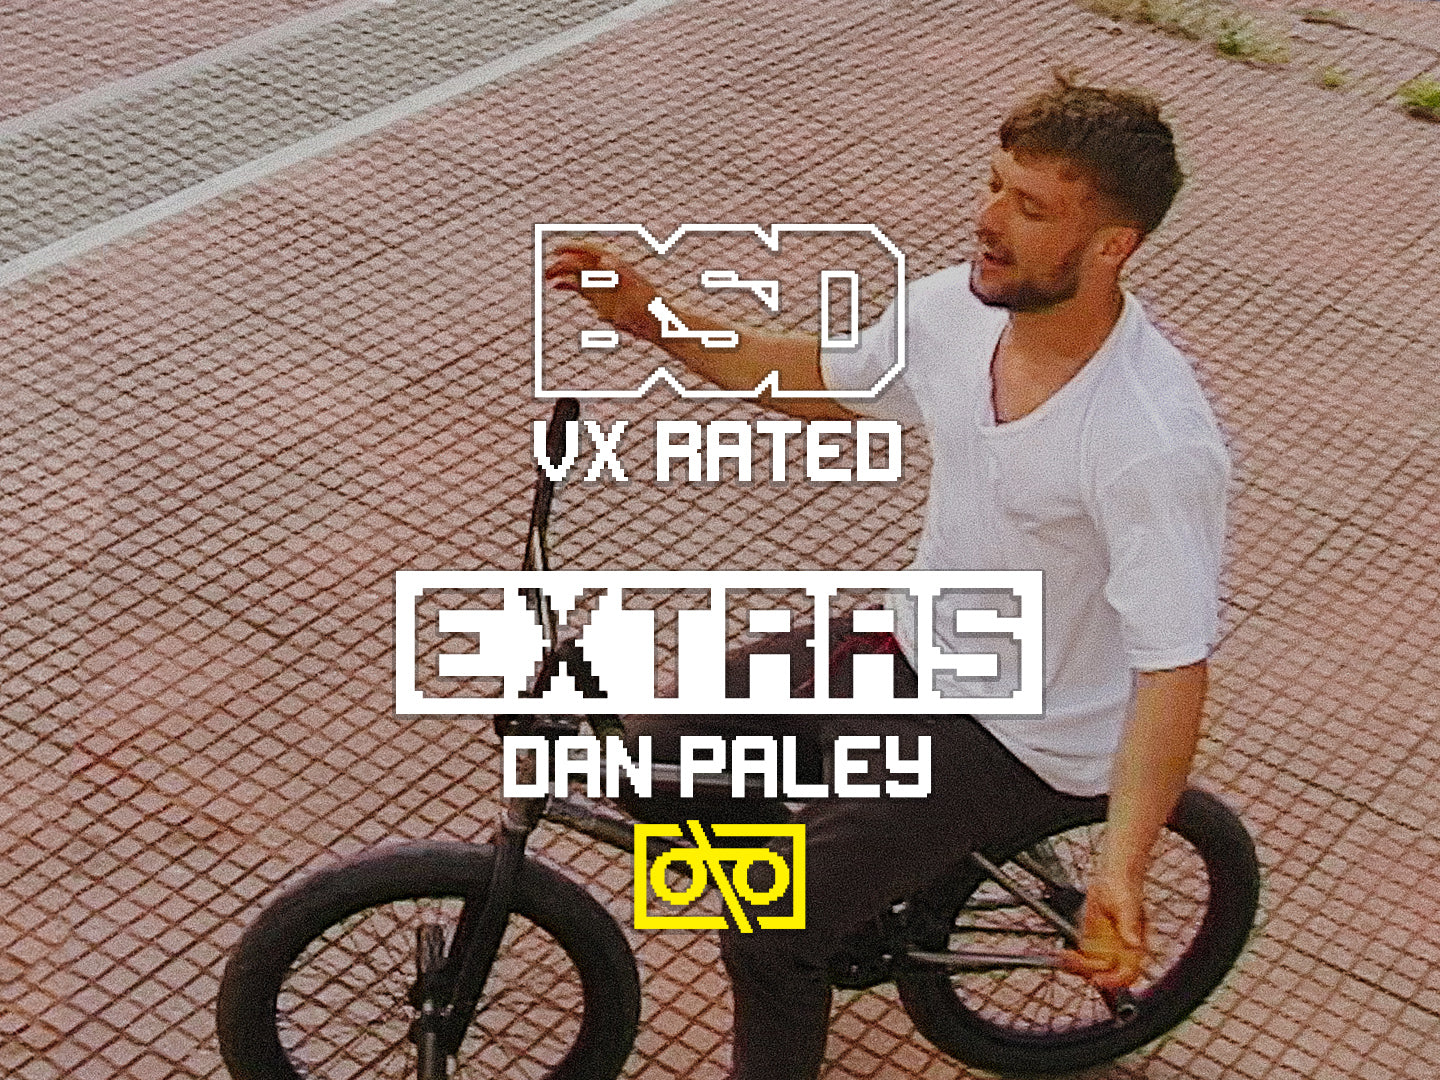 Dan Paley VX Rated Extras